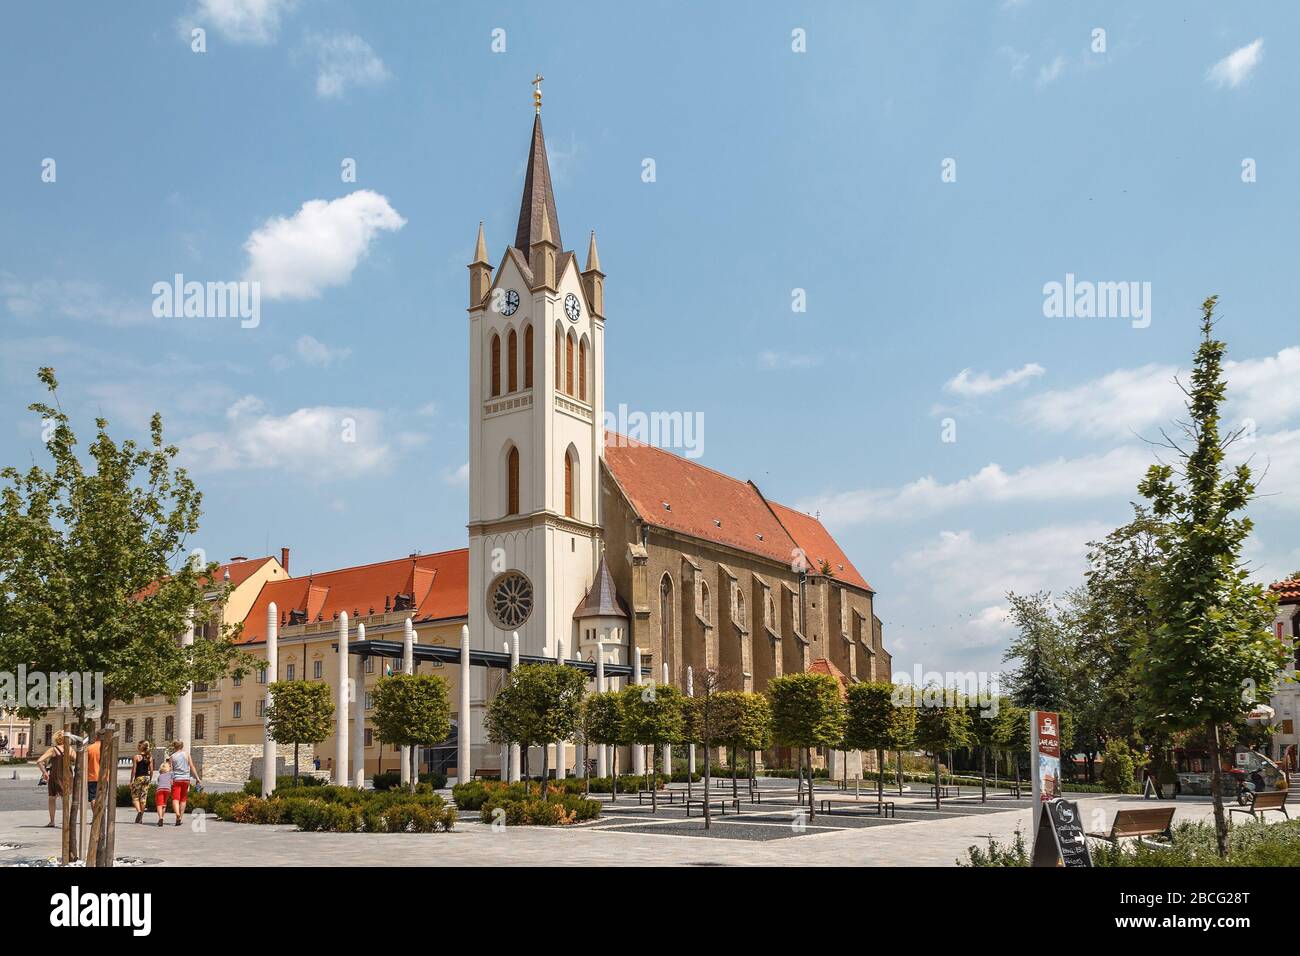 The Our Lady of Hungary Church in Keszthely on a suny summer day Stock Photo